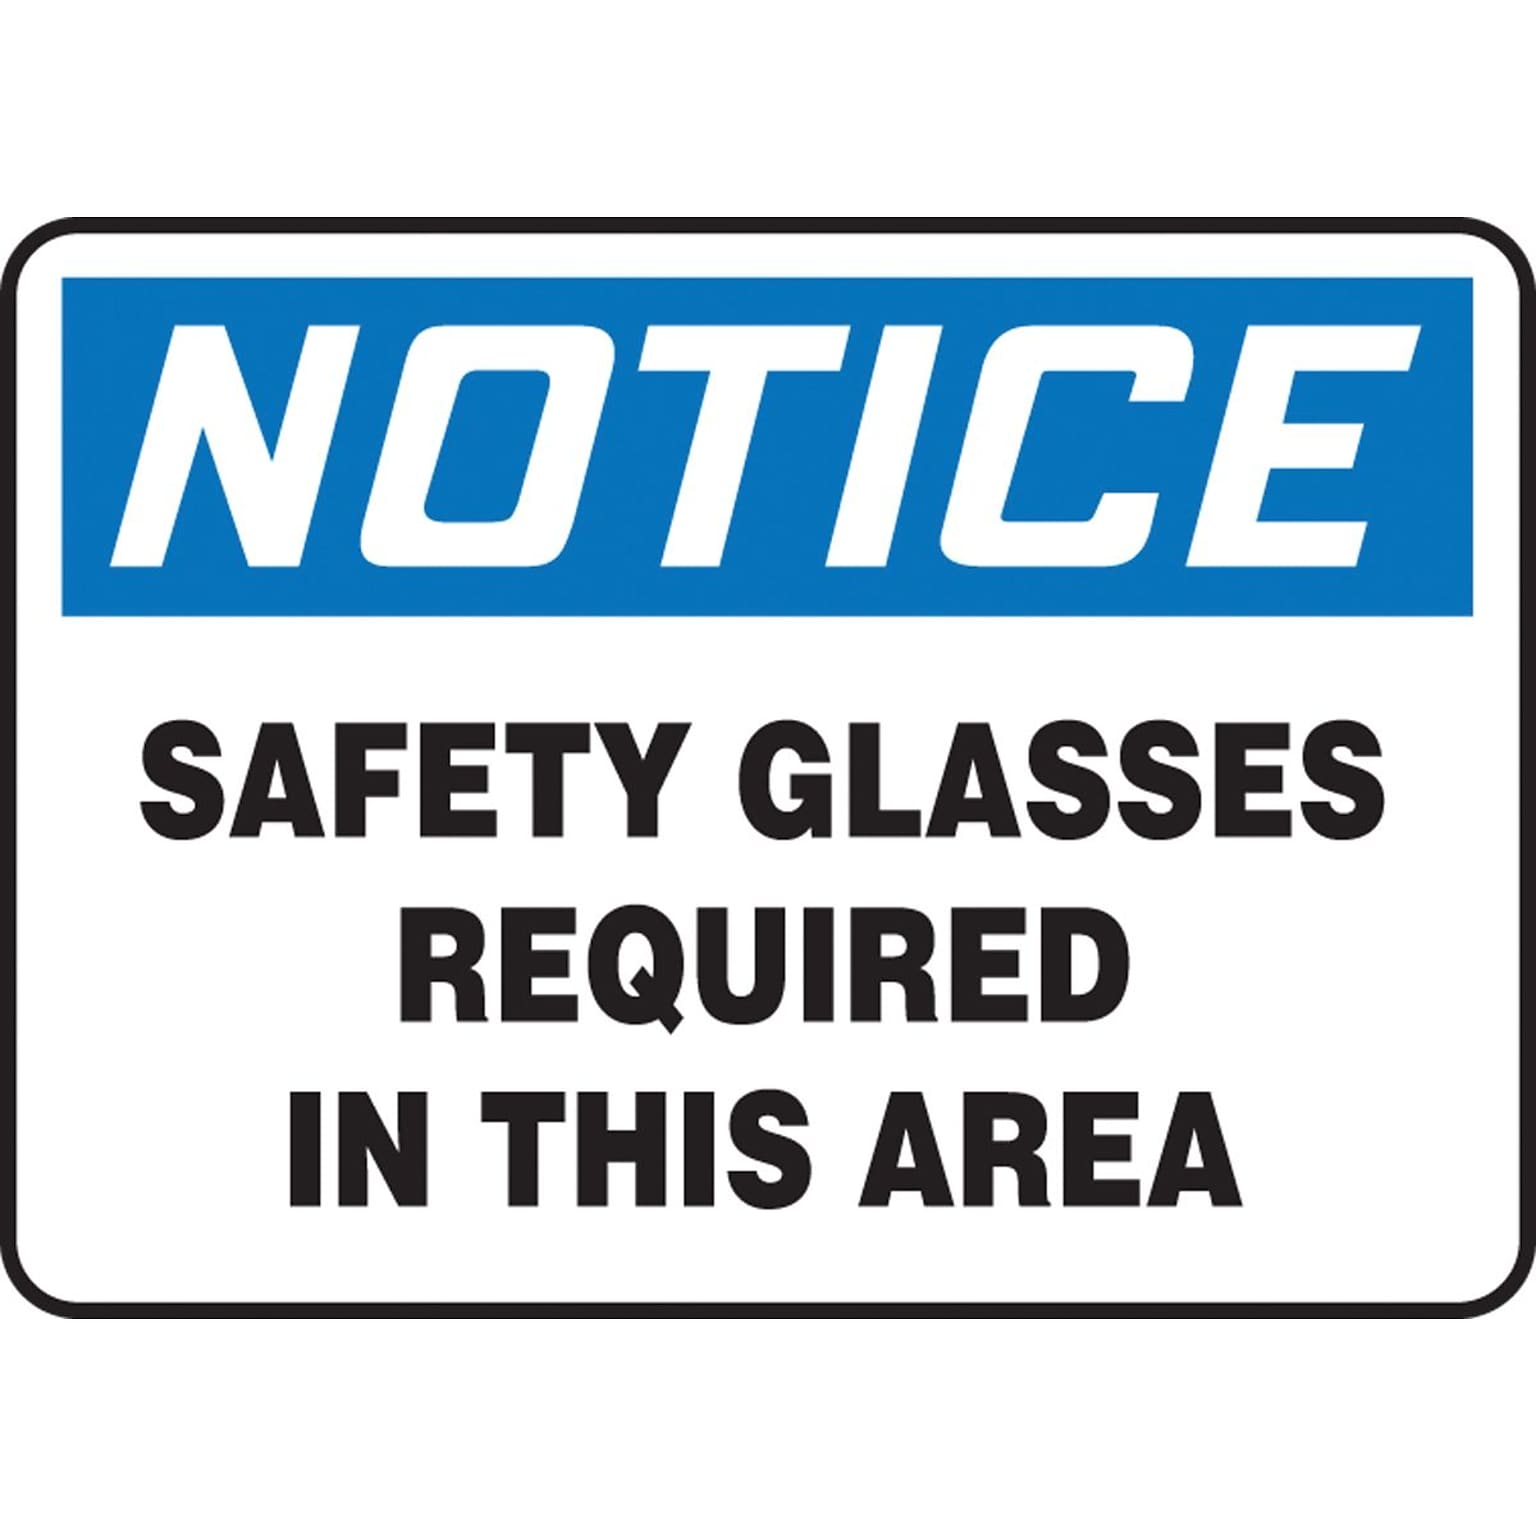 Accuform 7 x 10 Vinyl Safety Sign NOTICE SAFETY GLASSES REQUIRED.., Blue/Black On White (MPPE854VS)